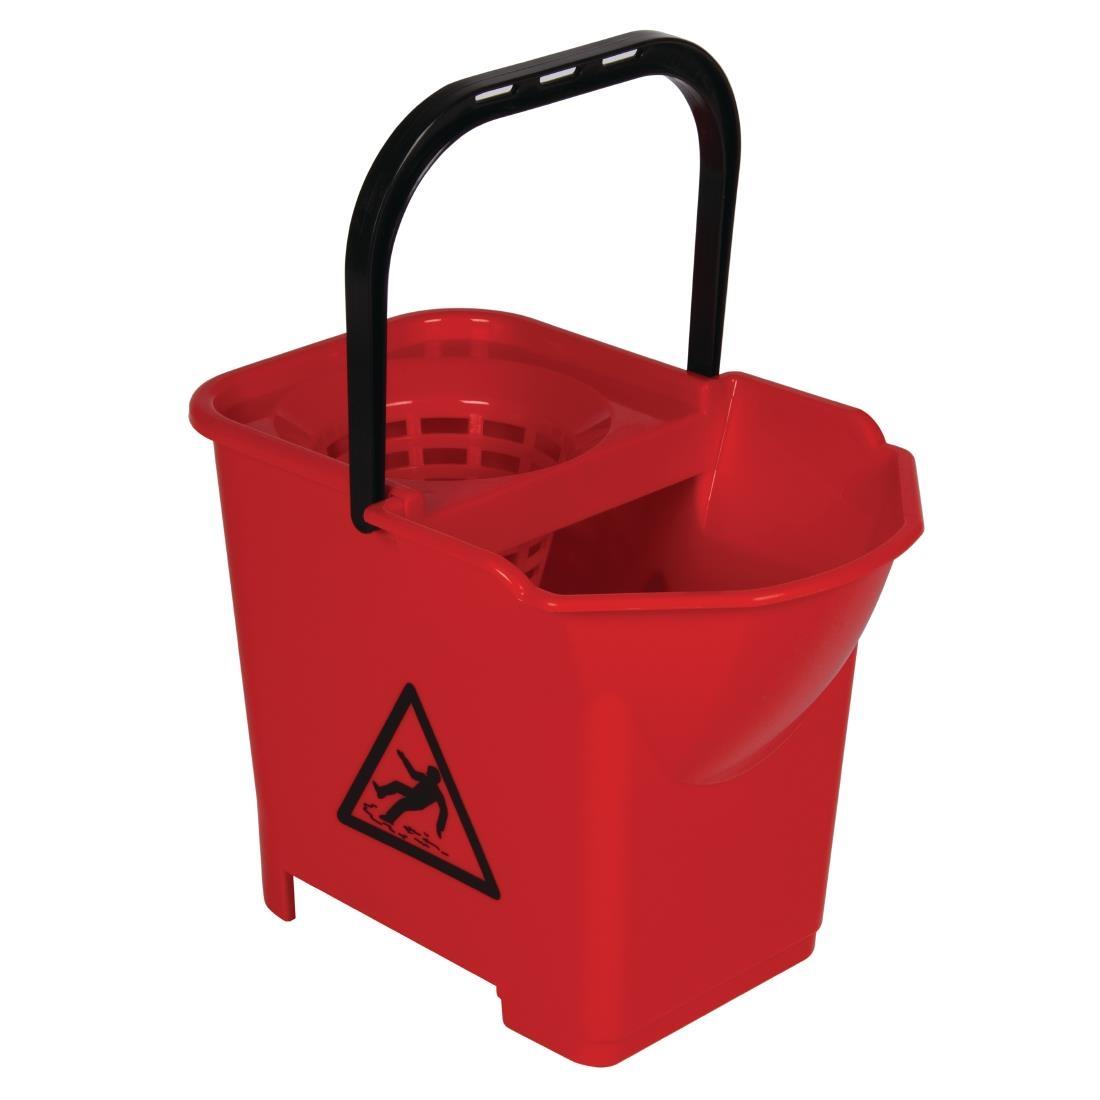 Jantex Colour Coded Mop Bucket Red - S222  - 1